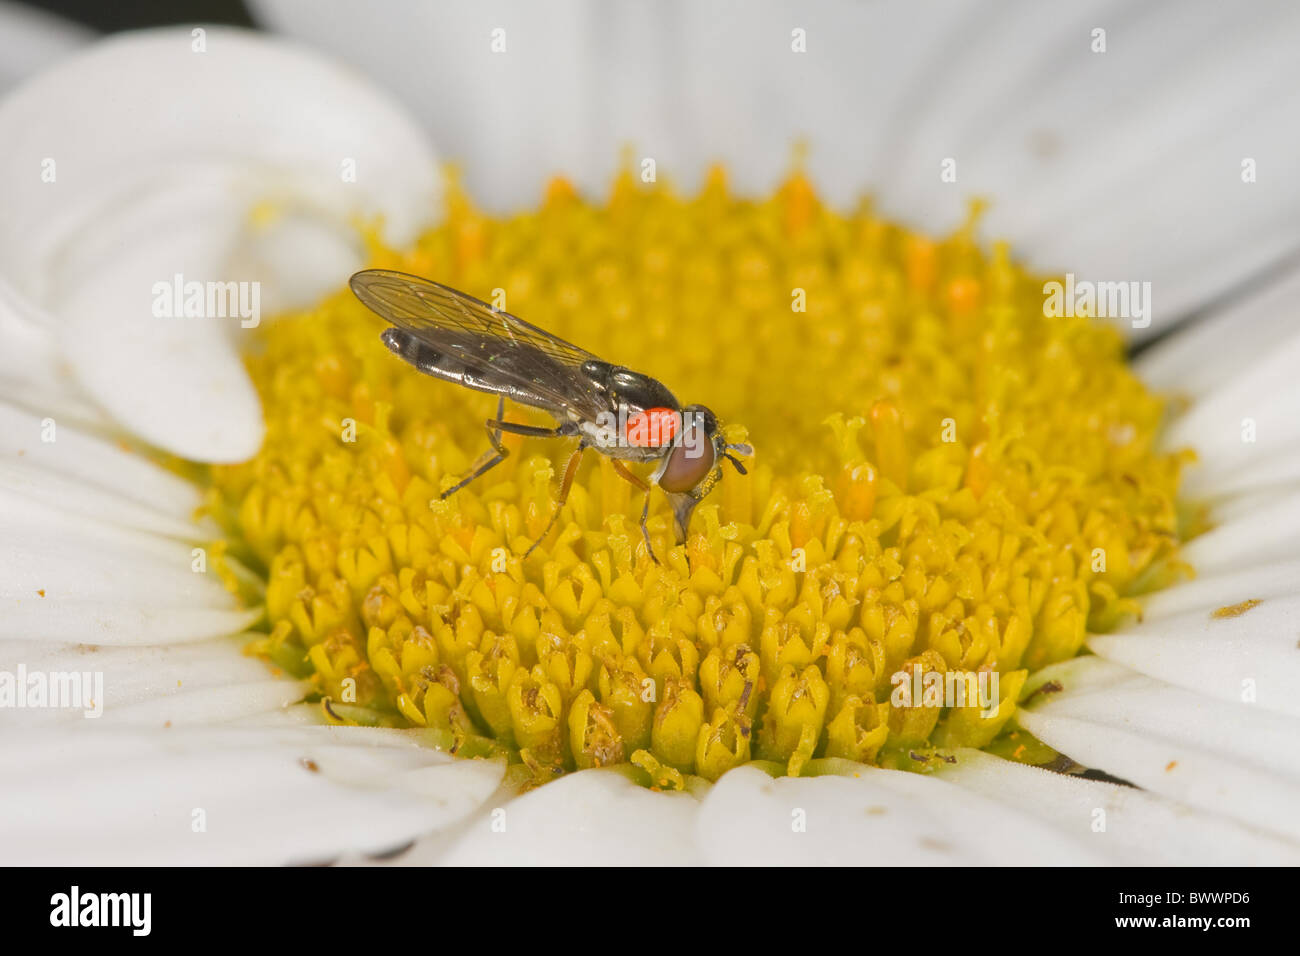 invertebrate invertebrates animal animals arthropod arthropods insect insects fly flies hoverfly hoverflies 'hover-fly' Stock Photo